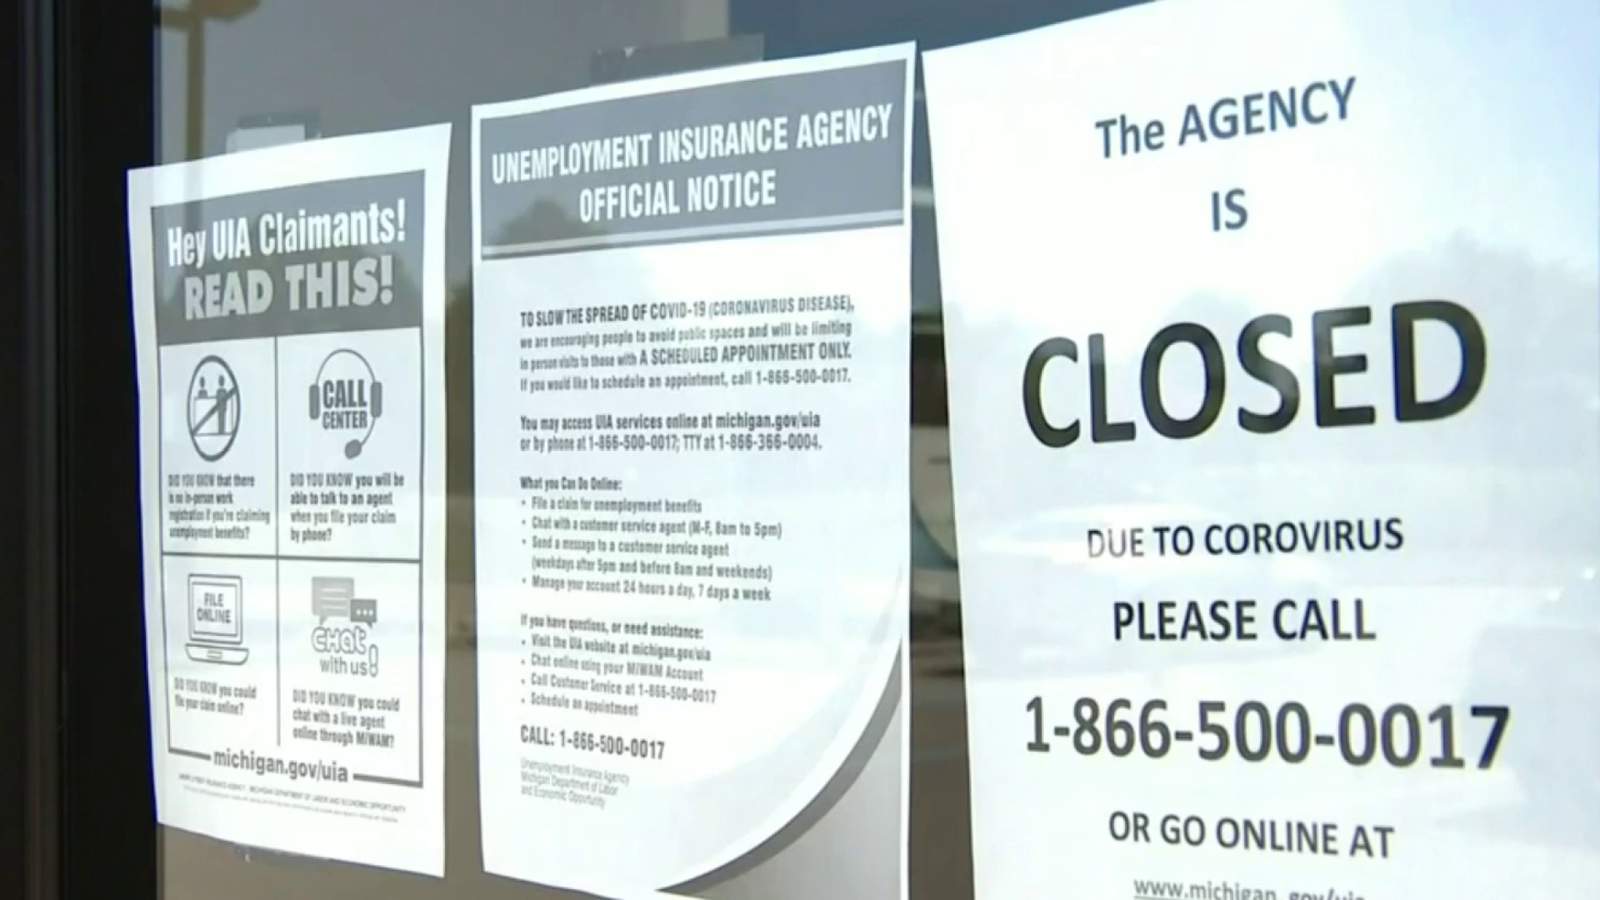 Why are Michigan unemployment offices still closed?